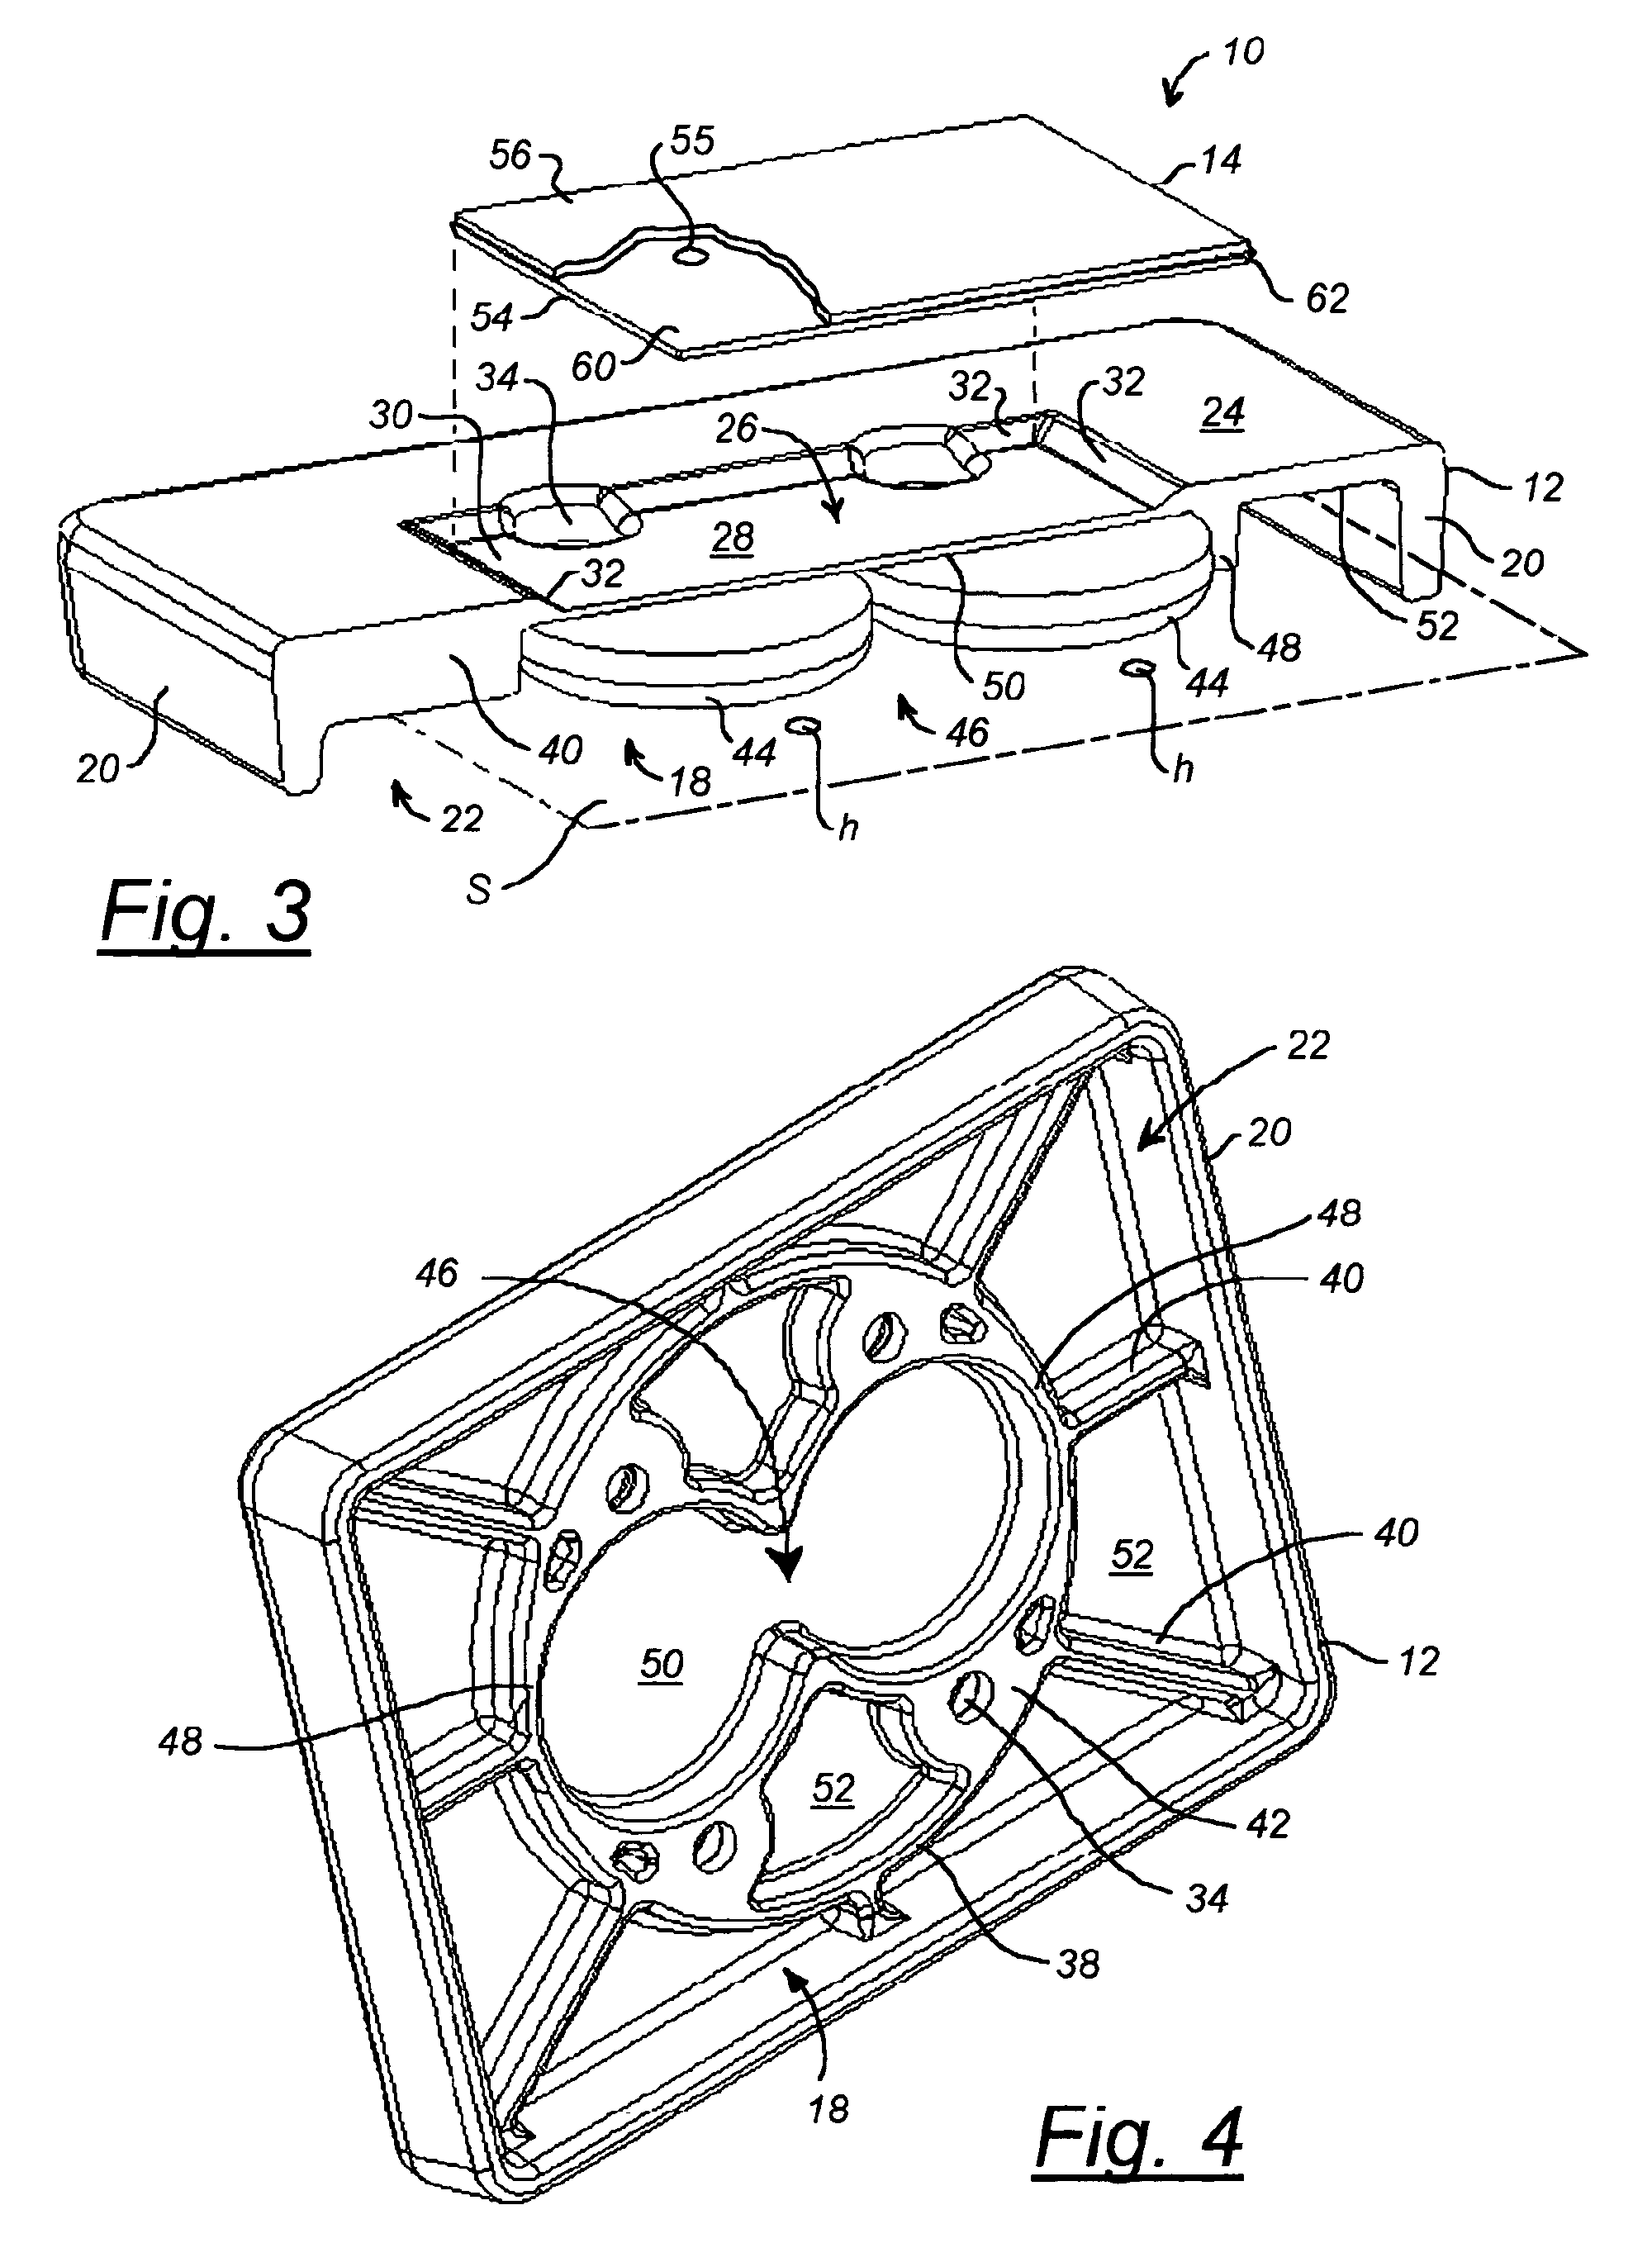 Magnetic mounting apparatus